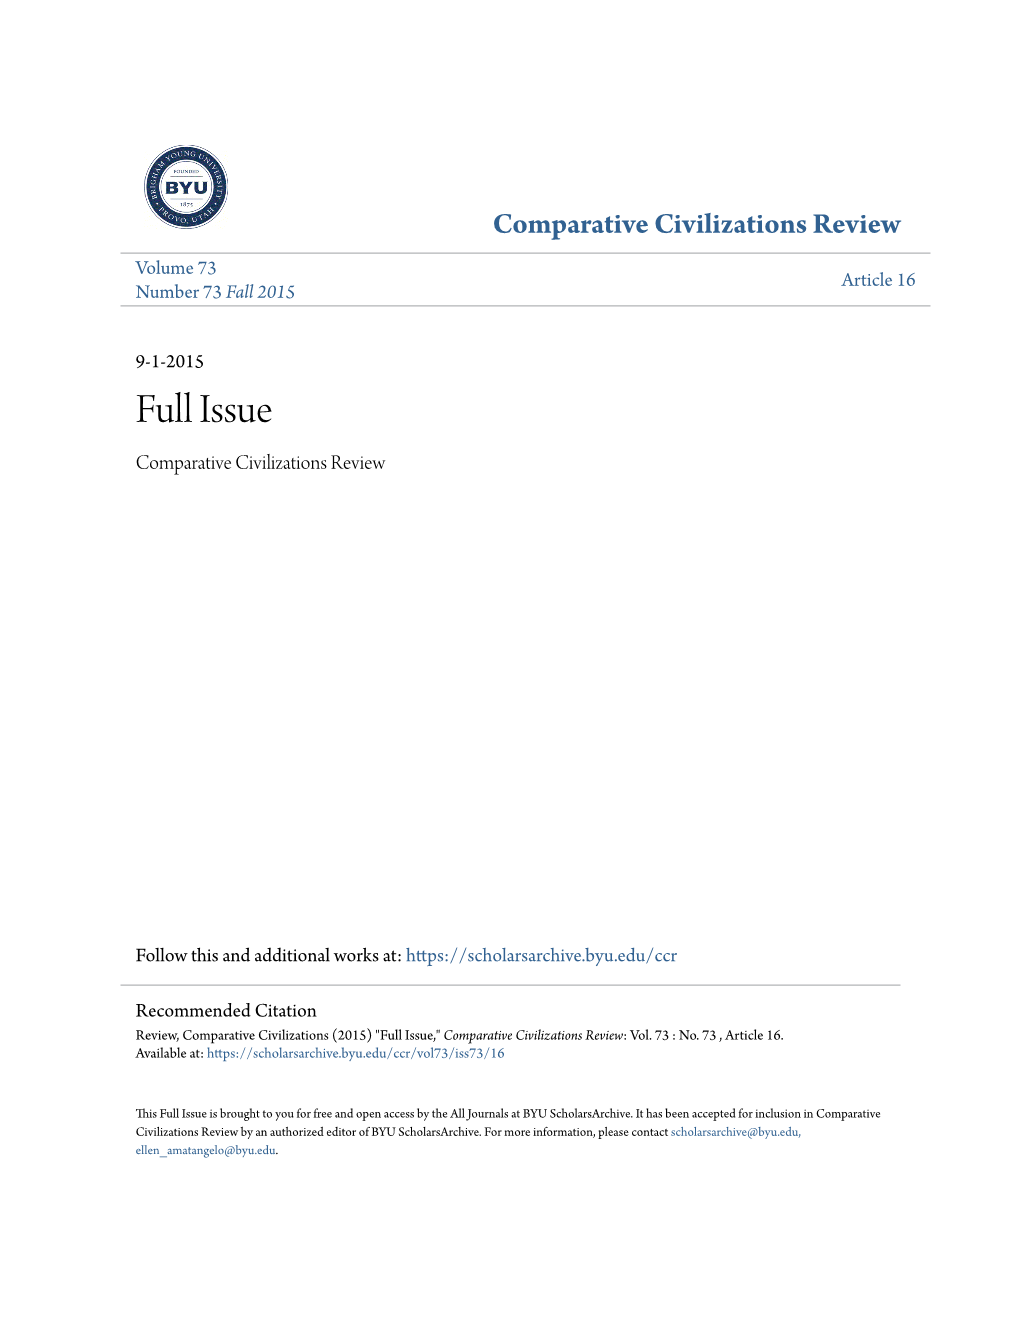 Full Issue Comparative Civilizations Review